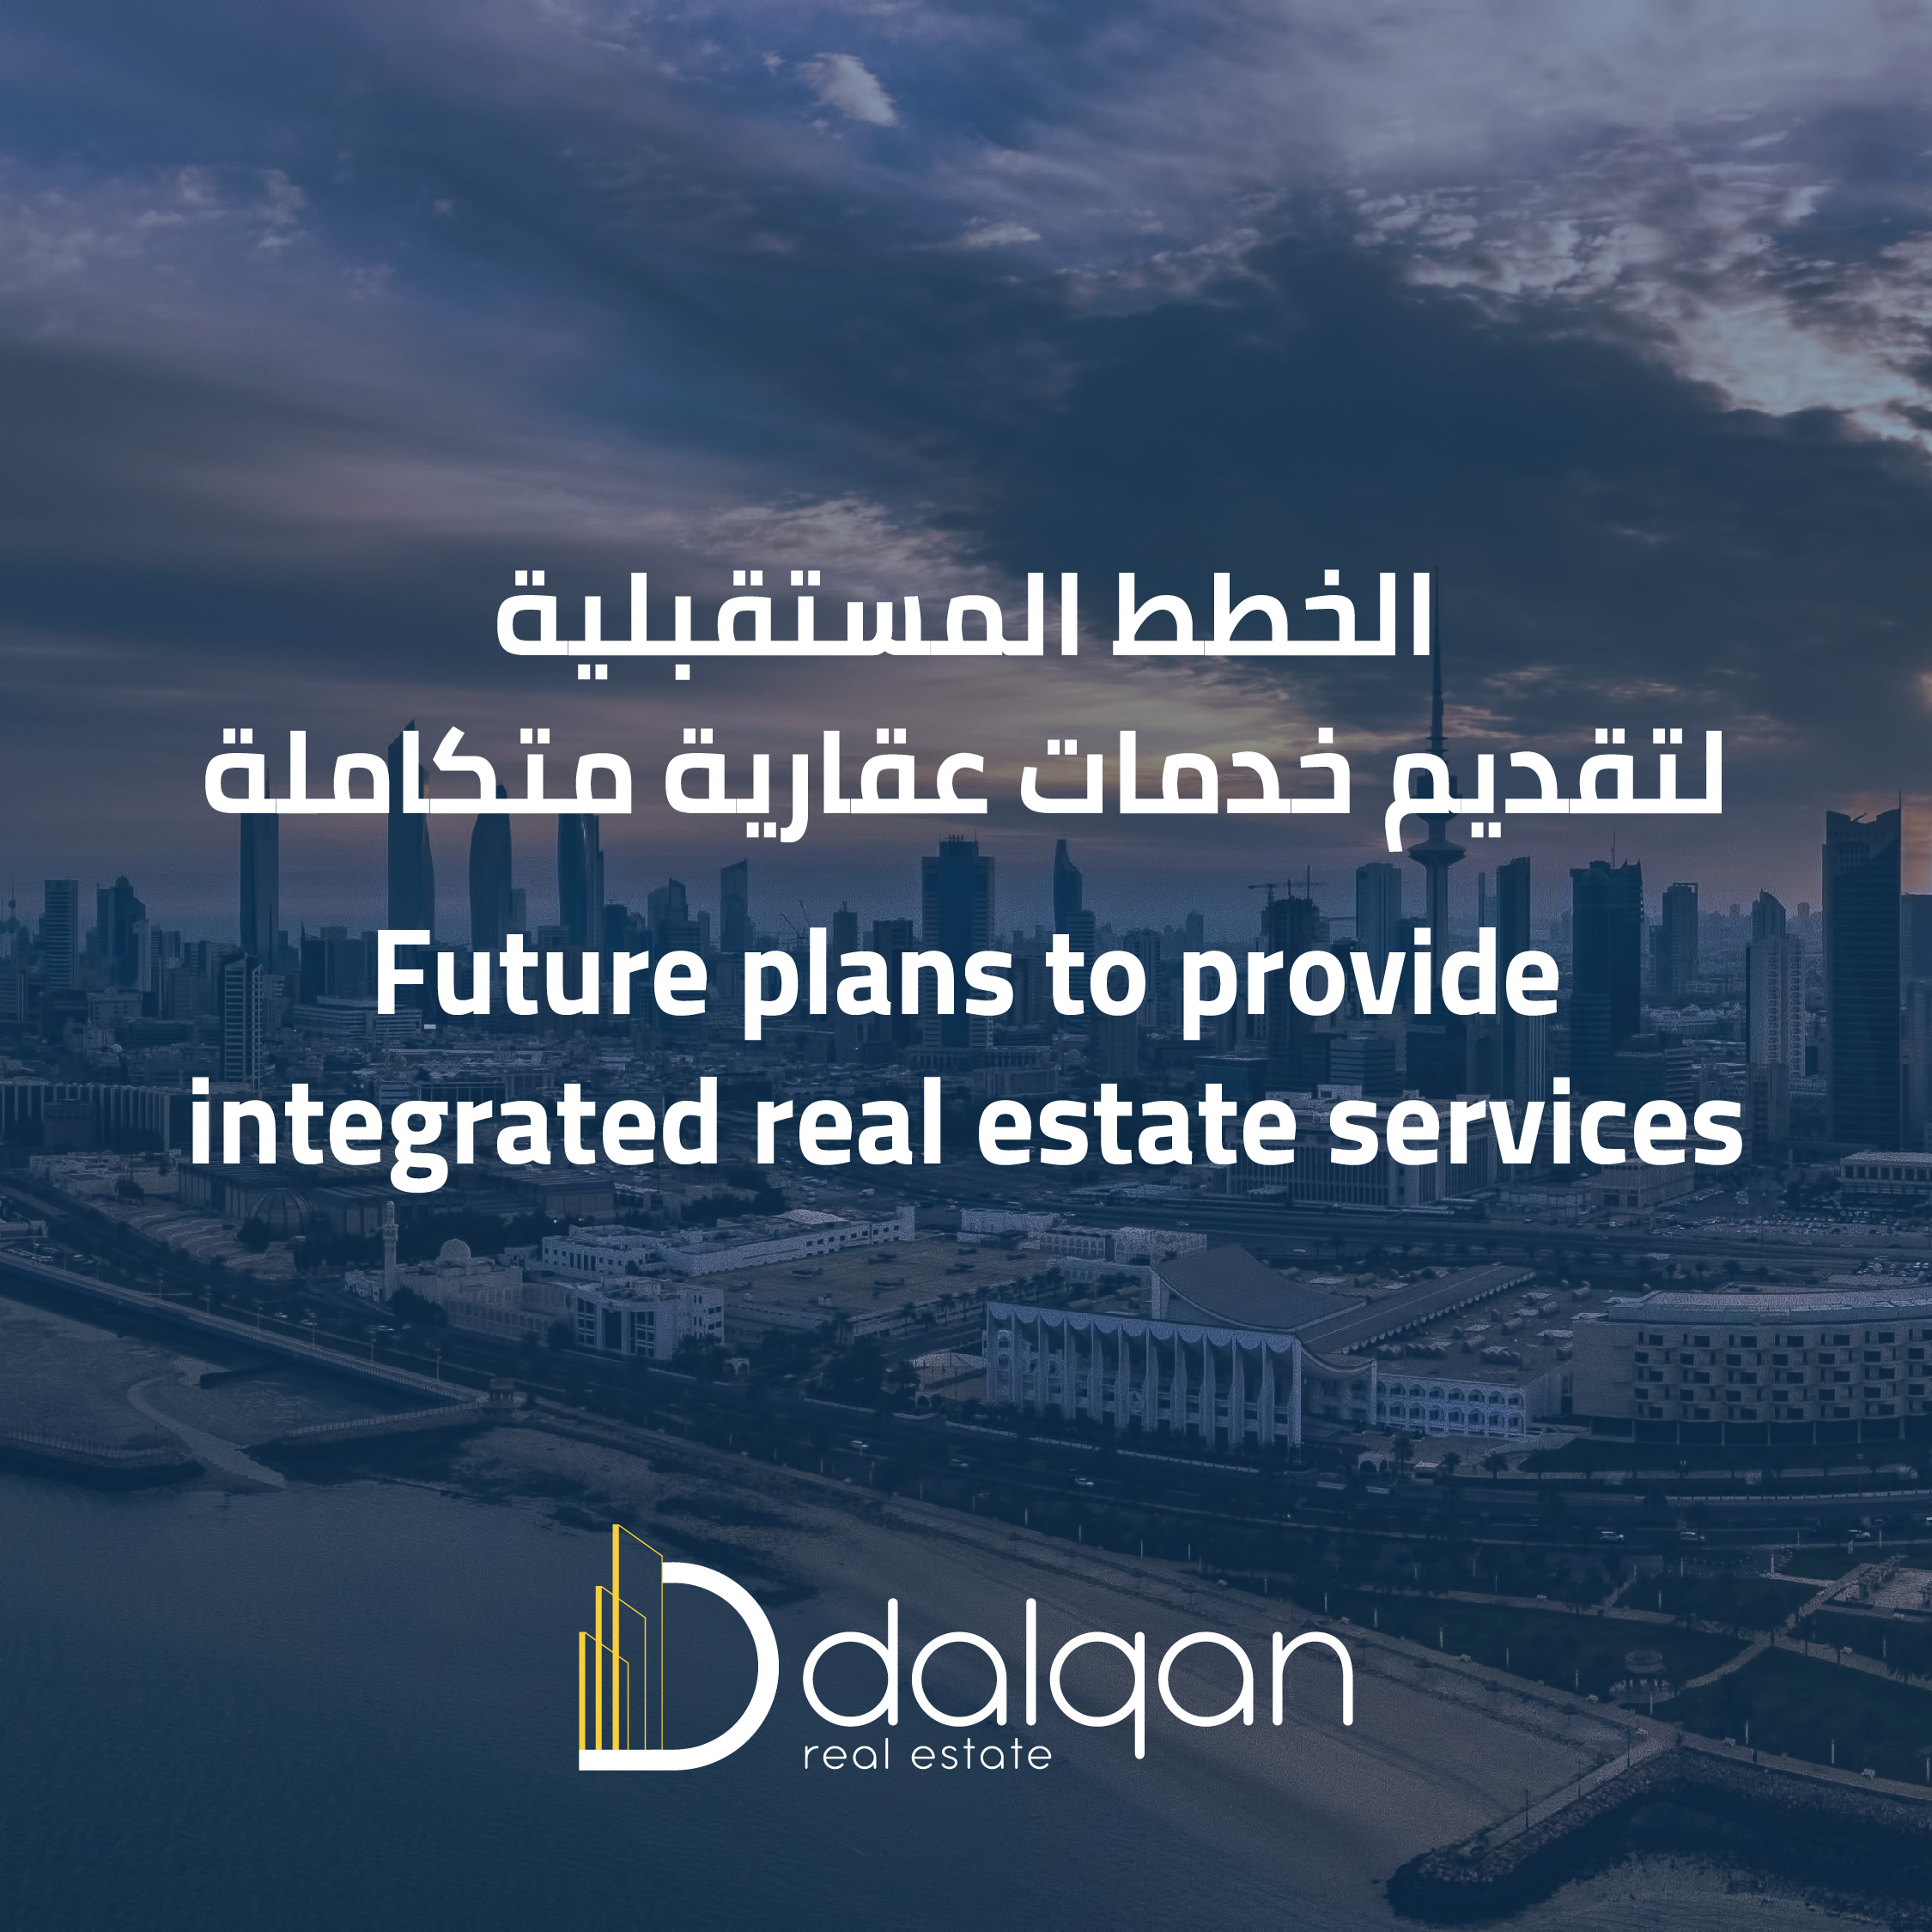 Dalqan Real Estate Company aspires to advance its future plans, by developing real estate services that support its business locally and regionally.